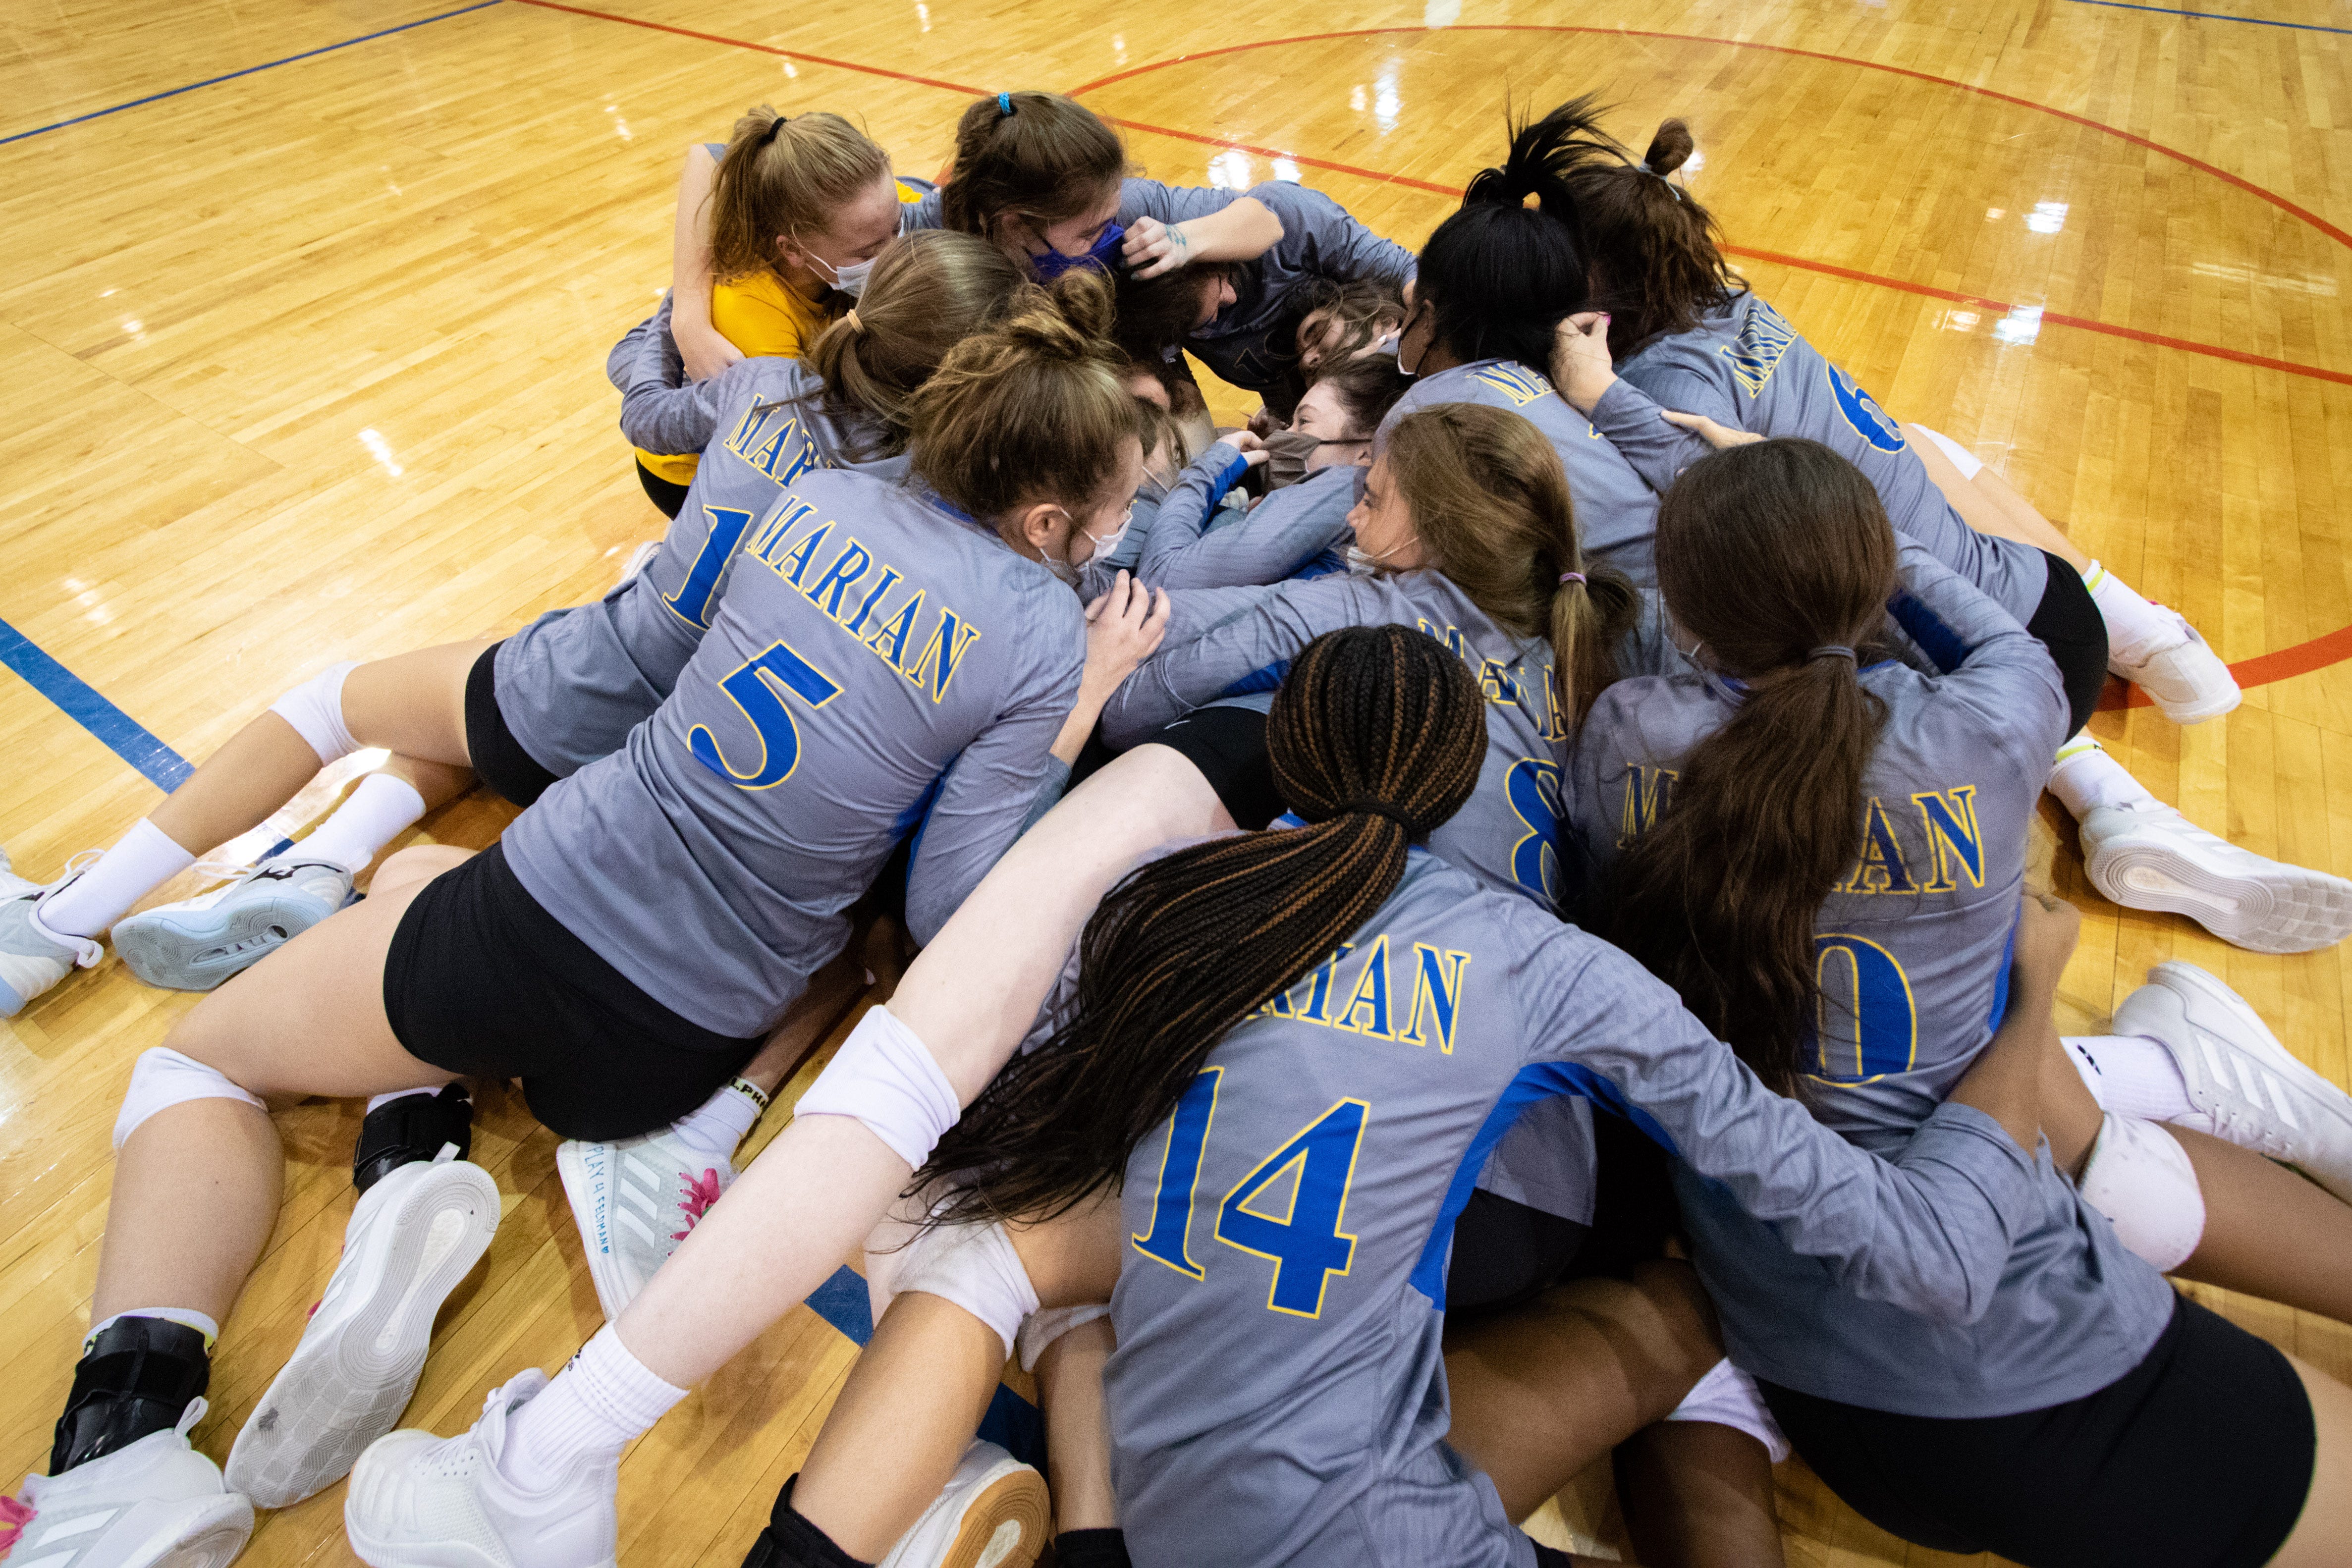 Birmingham Marian celebrates together after defeating Lowell for the Div. 1 volleyball title.